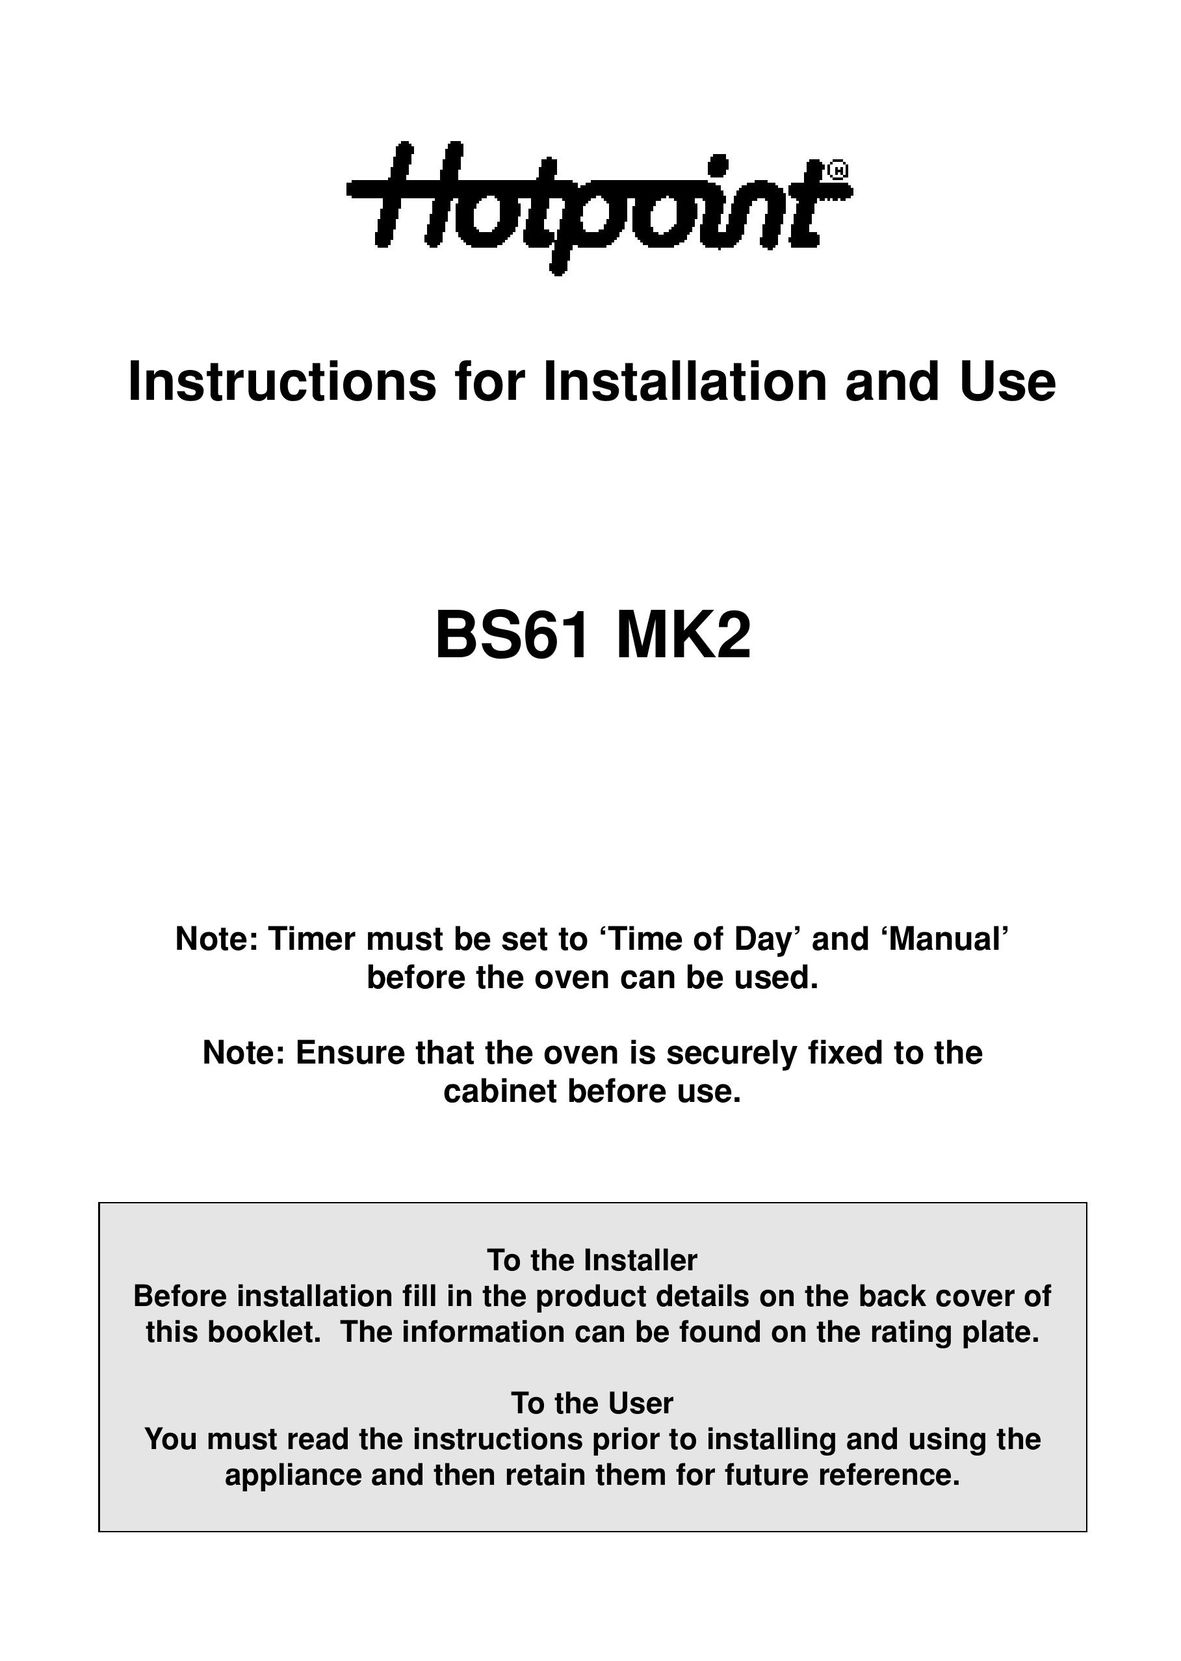 Hotpoint BS61 MK2 Microwave Oven User Manual